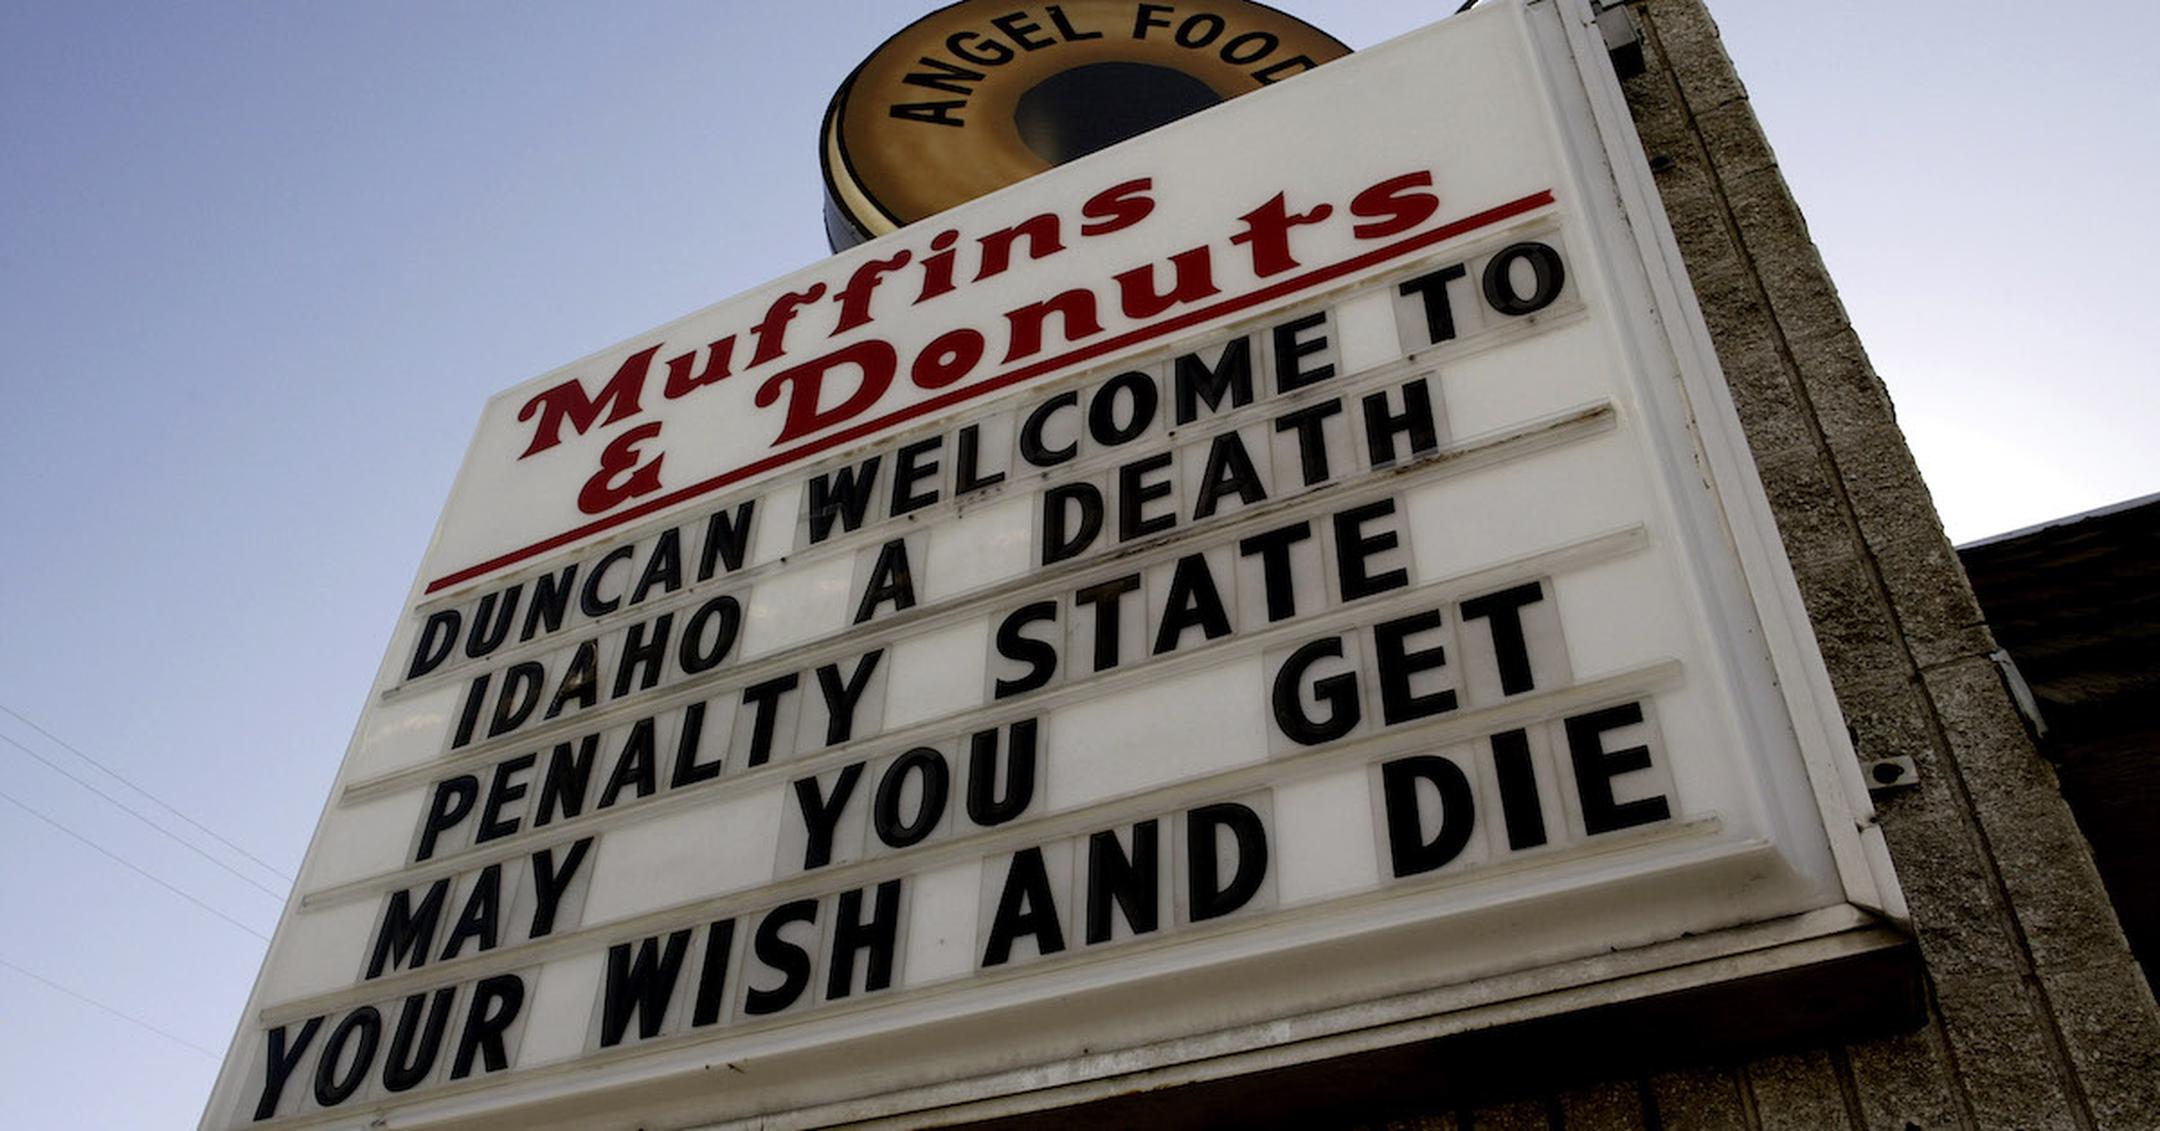 street sign - Gel For Muffins & Donuts Duncan Welcome To Idaho A Death Penalty State Penaltvolget Your Wish And Die